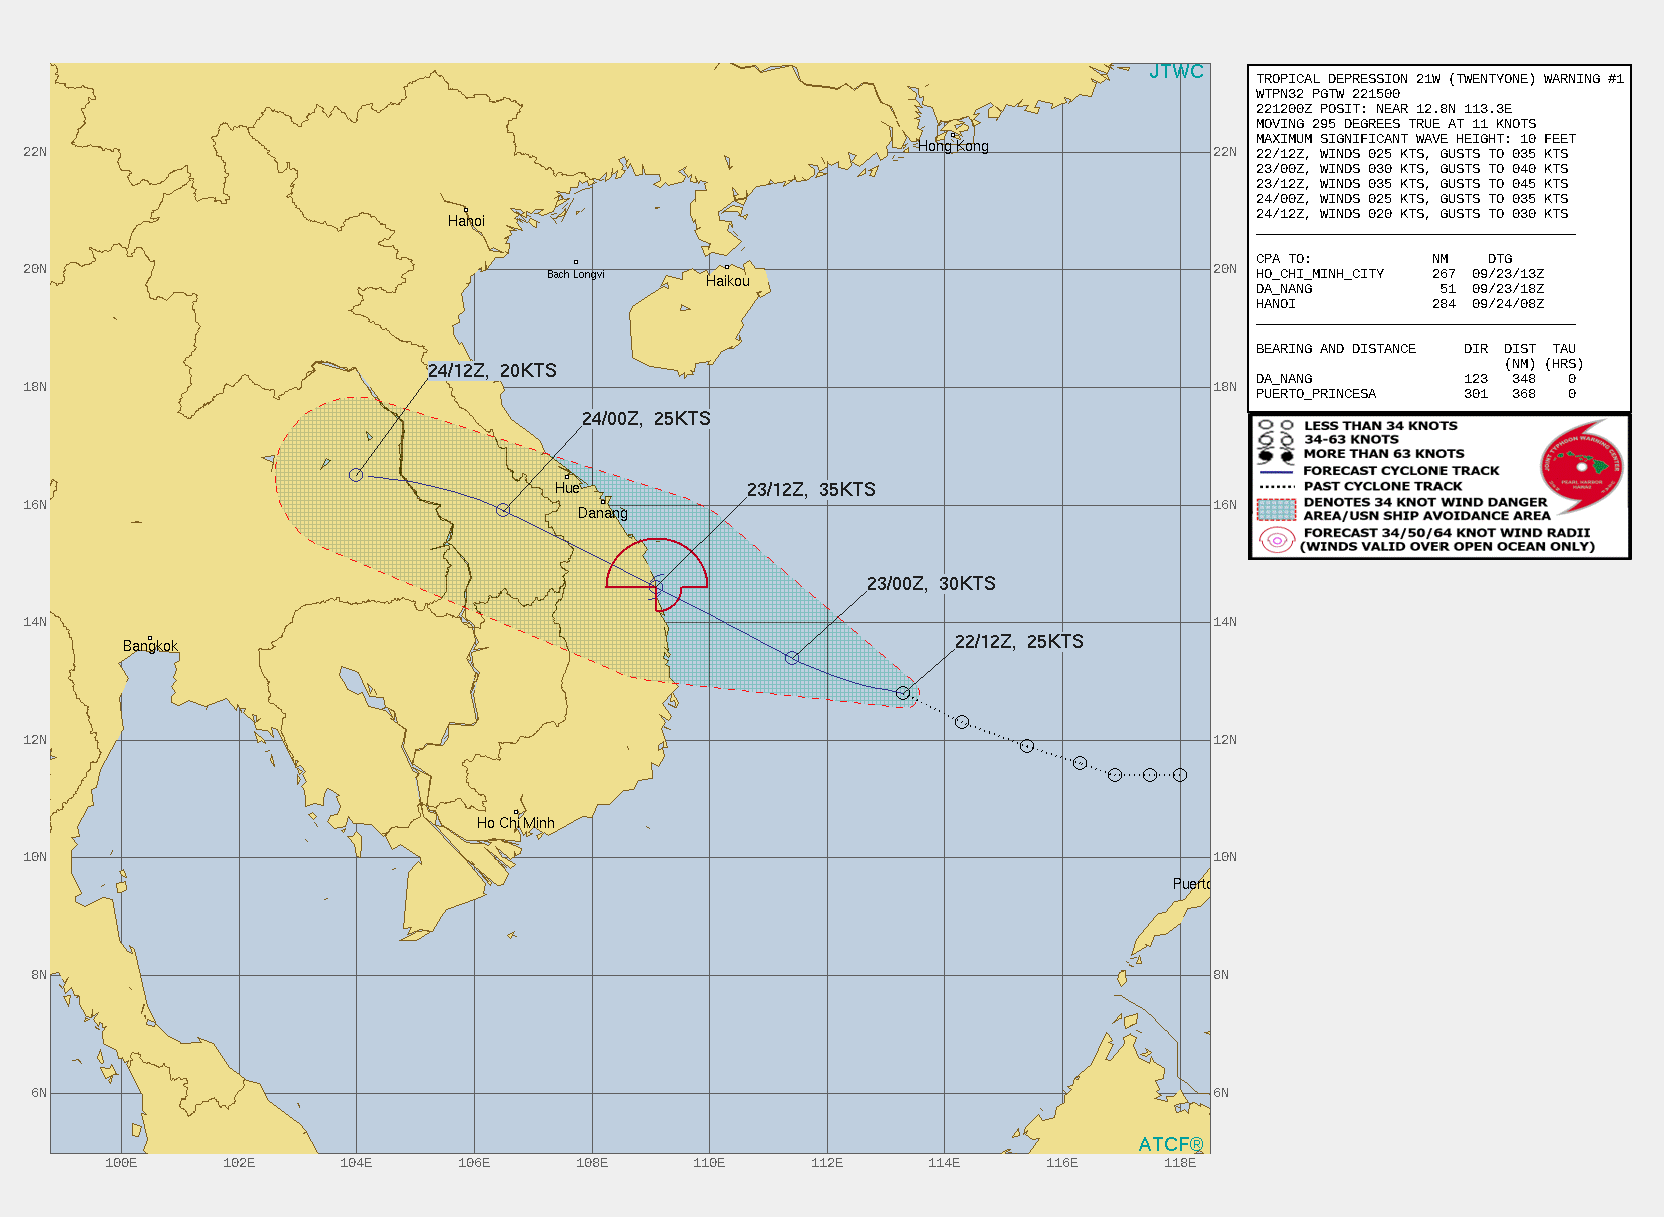 FORECAST REASONING.  SIGNIFICANT FORECAST CHANGES: THIS INITIAL PROGNOSTIC REASONING MESSAGE ESTABLISHES THE FORECAST PHILOSOPHY.  FORECAST DISCUSSION: TD 21W IS FORECASTED TO TRACK STEADILY WEST-NORTHWESTWARD THROUGH THE DURATION OF THE FORECAST PERIOD ALONG THE SOUTHERN PERIPHERY OF THE LOW- TO MID-LEVEL SUBTROPICAL RIDGE CENTERED TO THE NORTH. THE SYSTEM IS EXPECTED TO MAKE LANDFALL ALONG THE CENTRAL VIETNAM COASTLINE AROUND 24H, TO THE SOUTH OF DA NANG. CONDITIONS ARE GENERALLY FAVORABLE FOR INTENSIFICATION WITH THE ONLY LIMITING FACTORS BEING THE MODEST, SINGLE-CHANNEL OUTFLOW AND LIMITED TIME AVAILABLE PRIOR TO LANDFALL. TD 21W IS EXPECTED TO INTENSIFY AT A CLIMATOLOGICAL RATE TO A PEAK OF 35 KNOTS AT OR JUST PRIOR TO LANDFALL NEAR 24H. ONCE INLAND THE SYSTEM WILL RAPIDLY DISSIPATE BY TAU 48 OVER EASTERN THAILAND DUE TO TERRAIN INTERACTION.